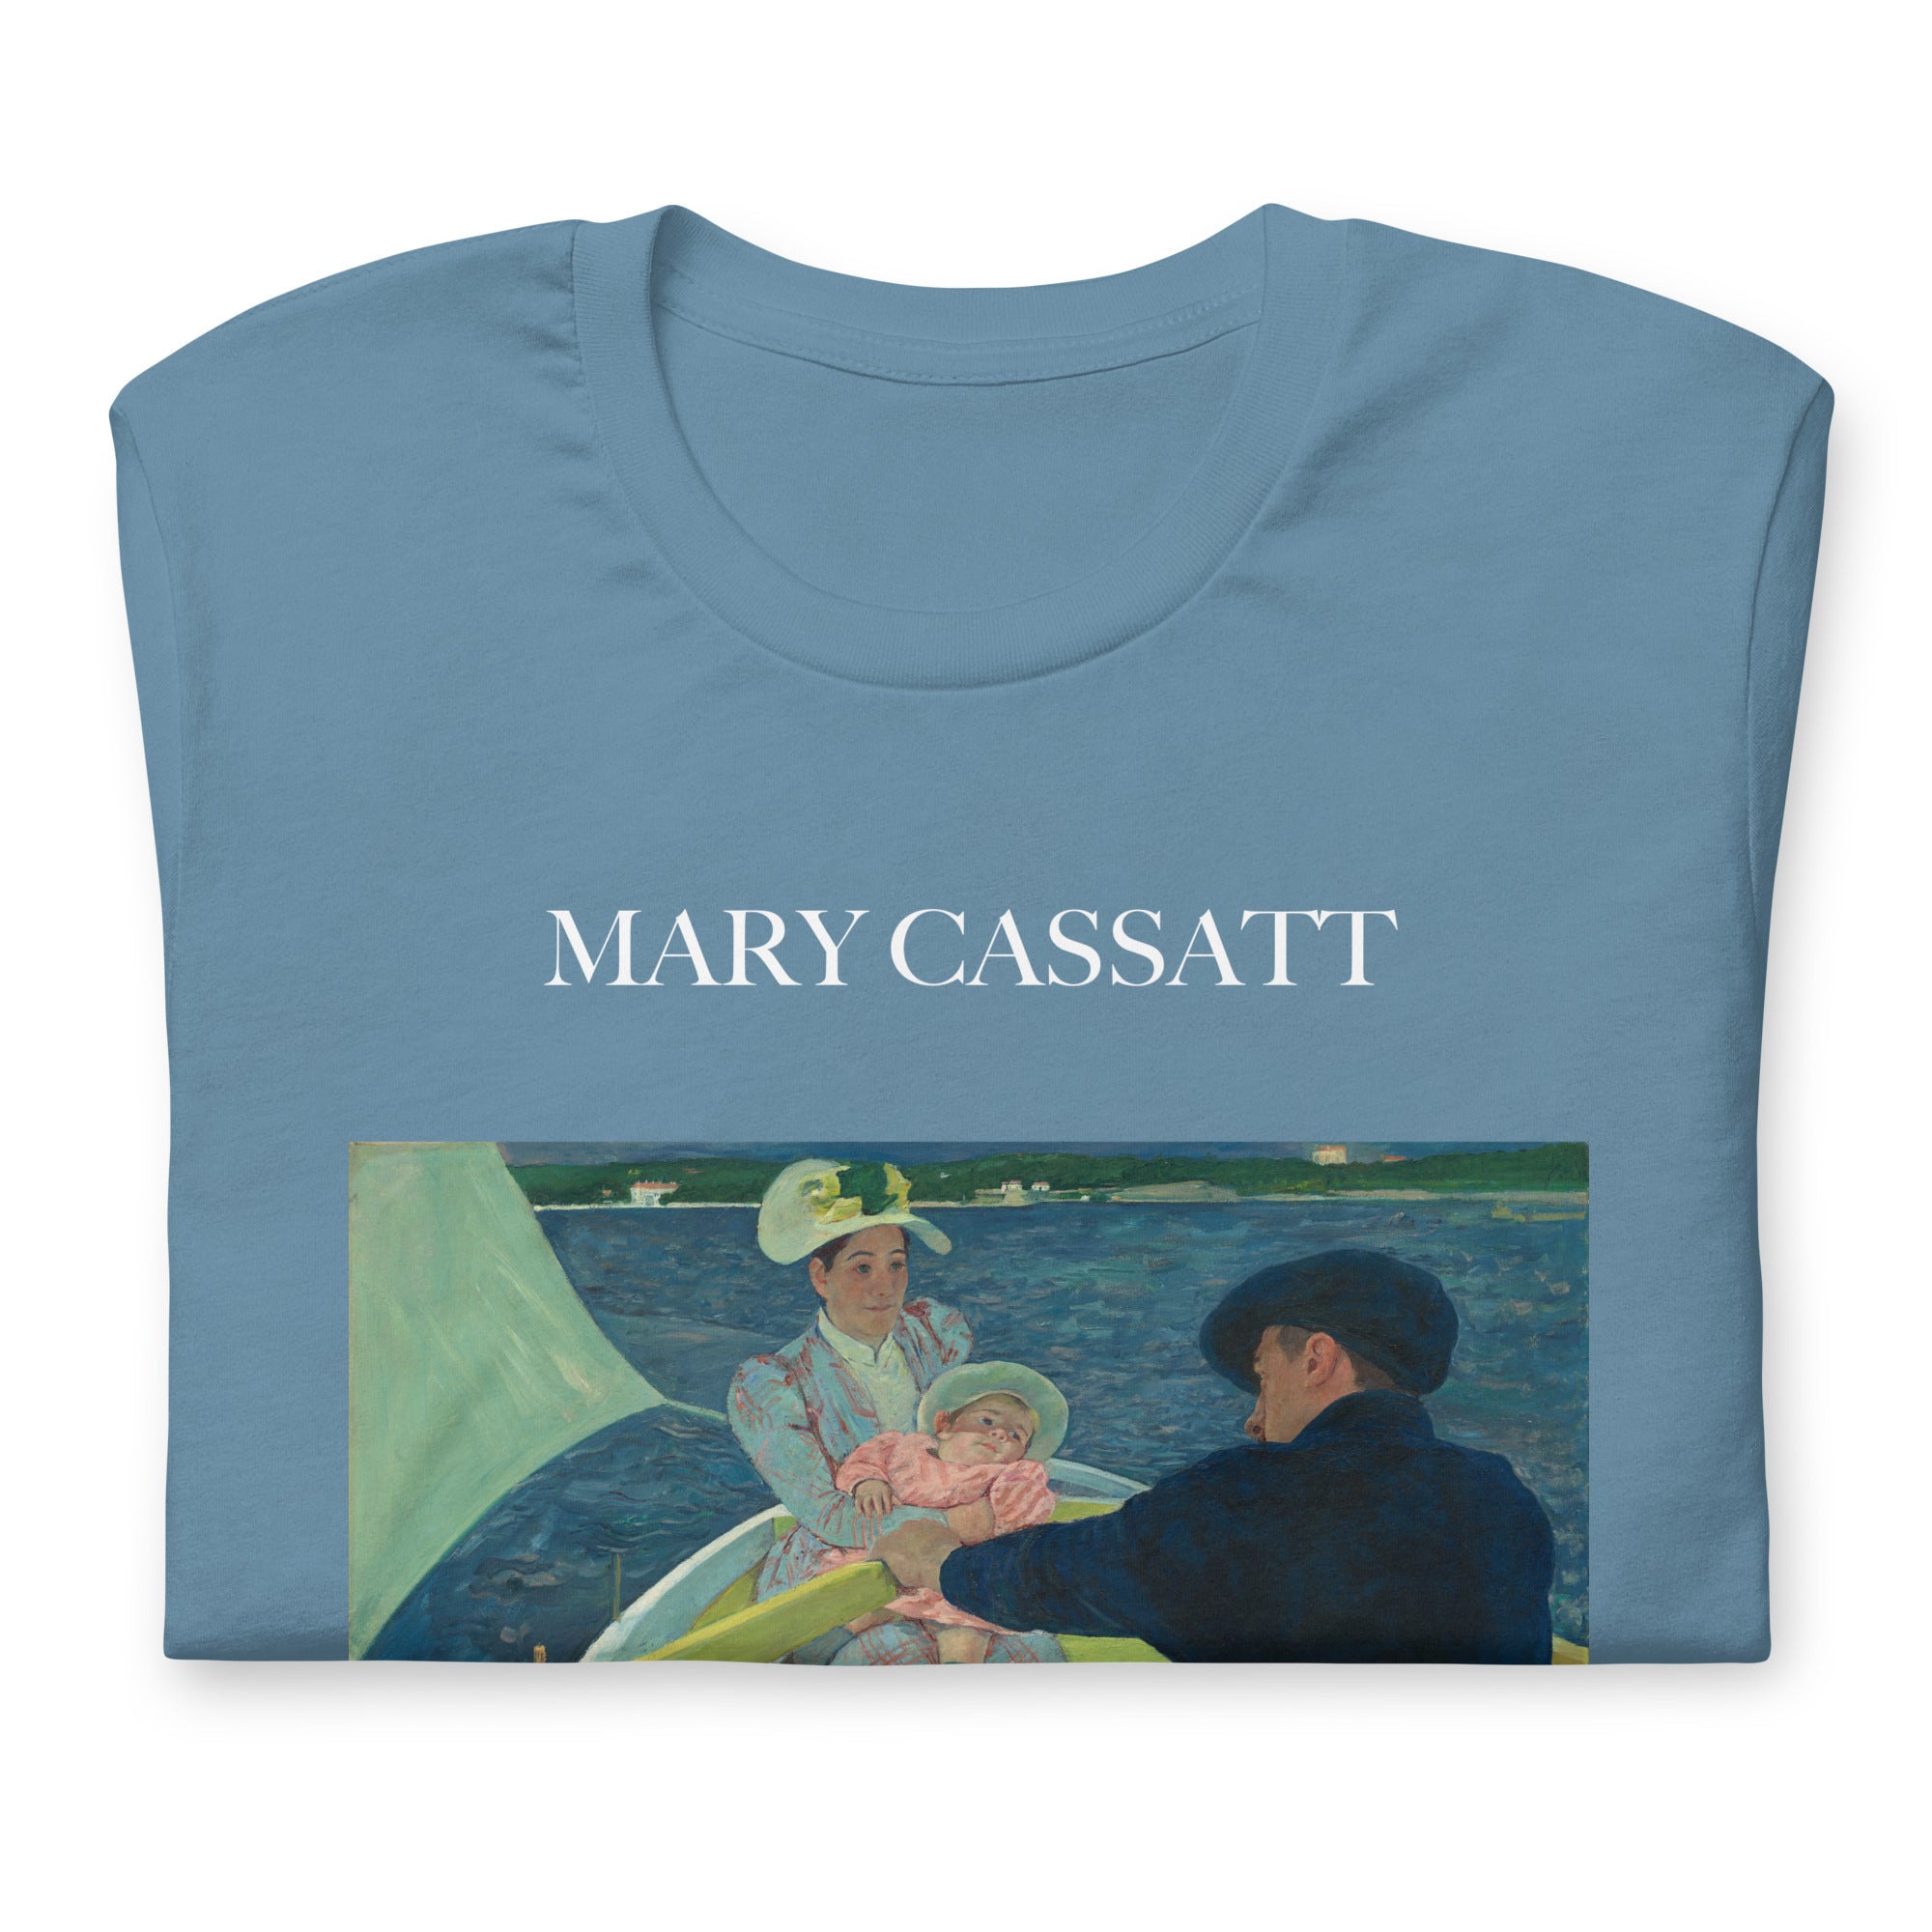 Mary Cassatt 'The Boating Party' Famous Painting T-Shirt | Unisex Classic Art Tee